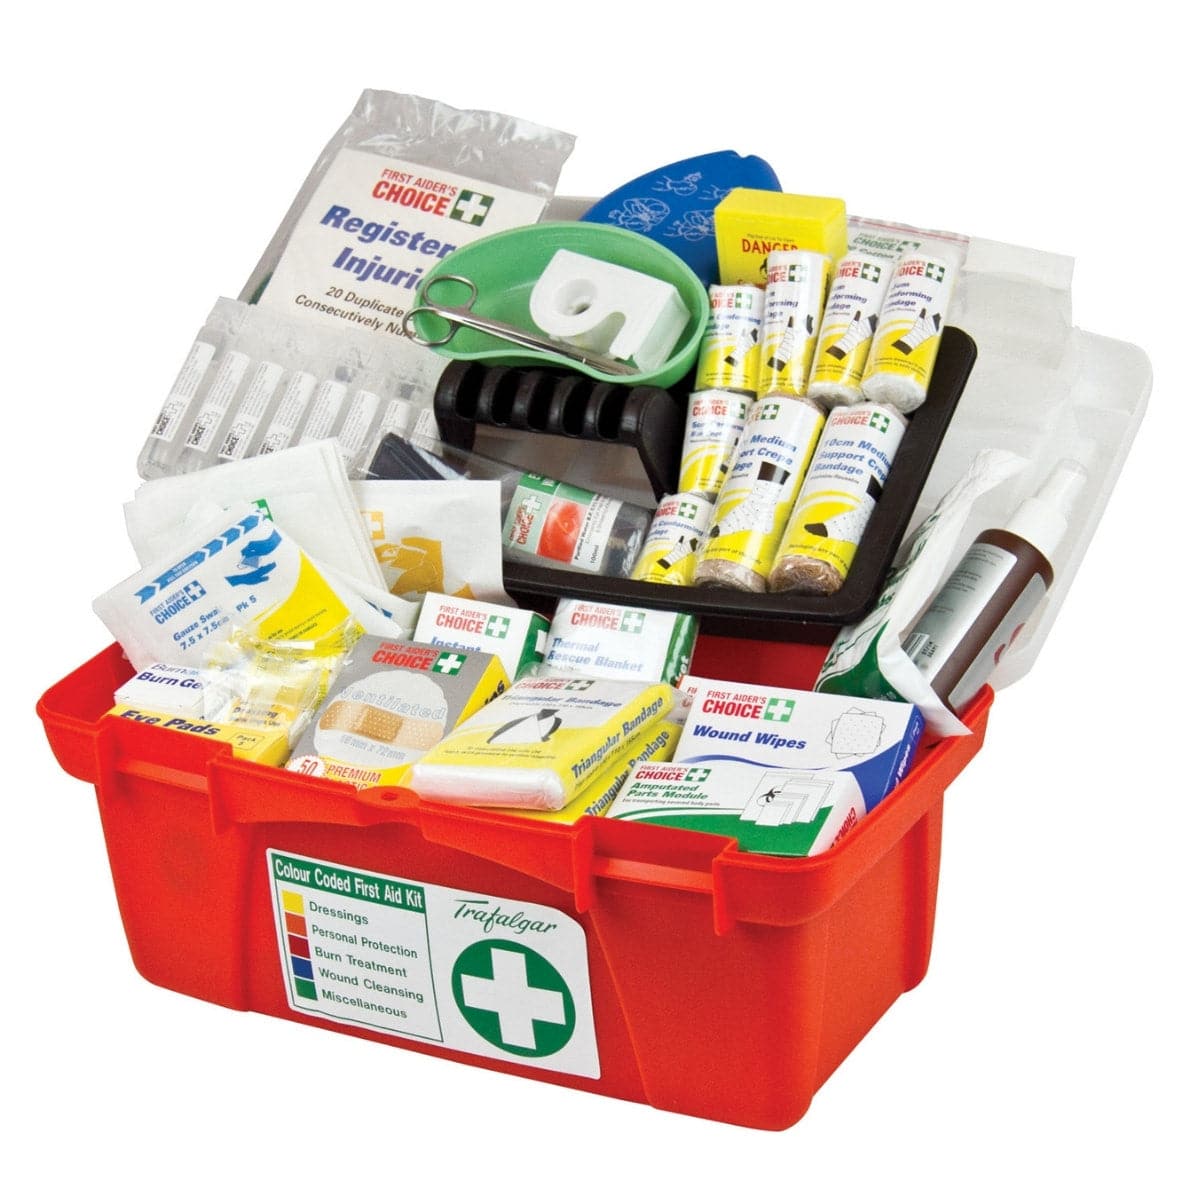 National Workplace First Aid Kits - Portable (Hard Case)